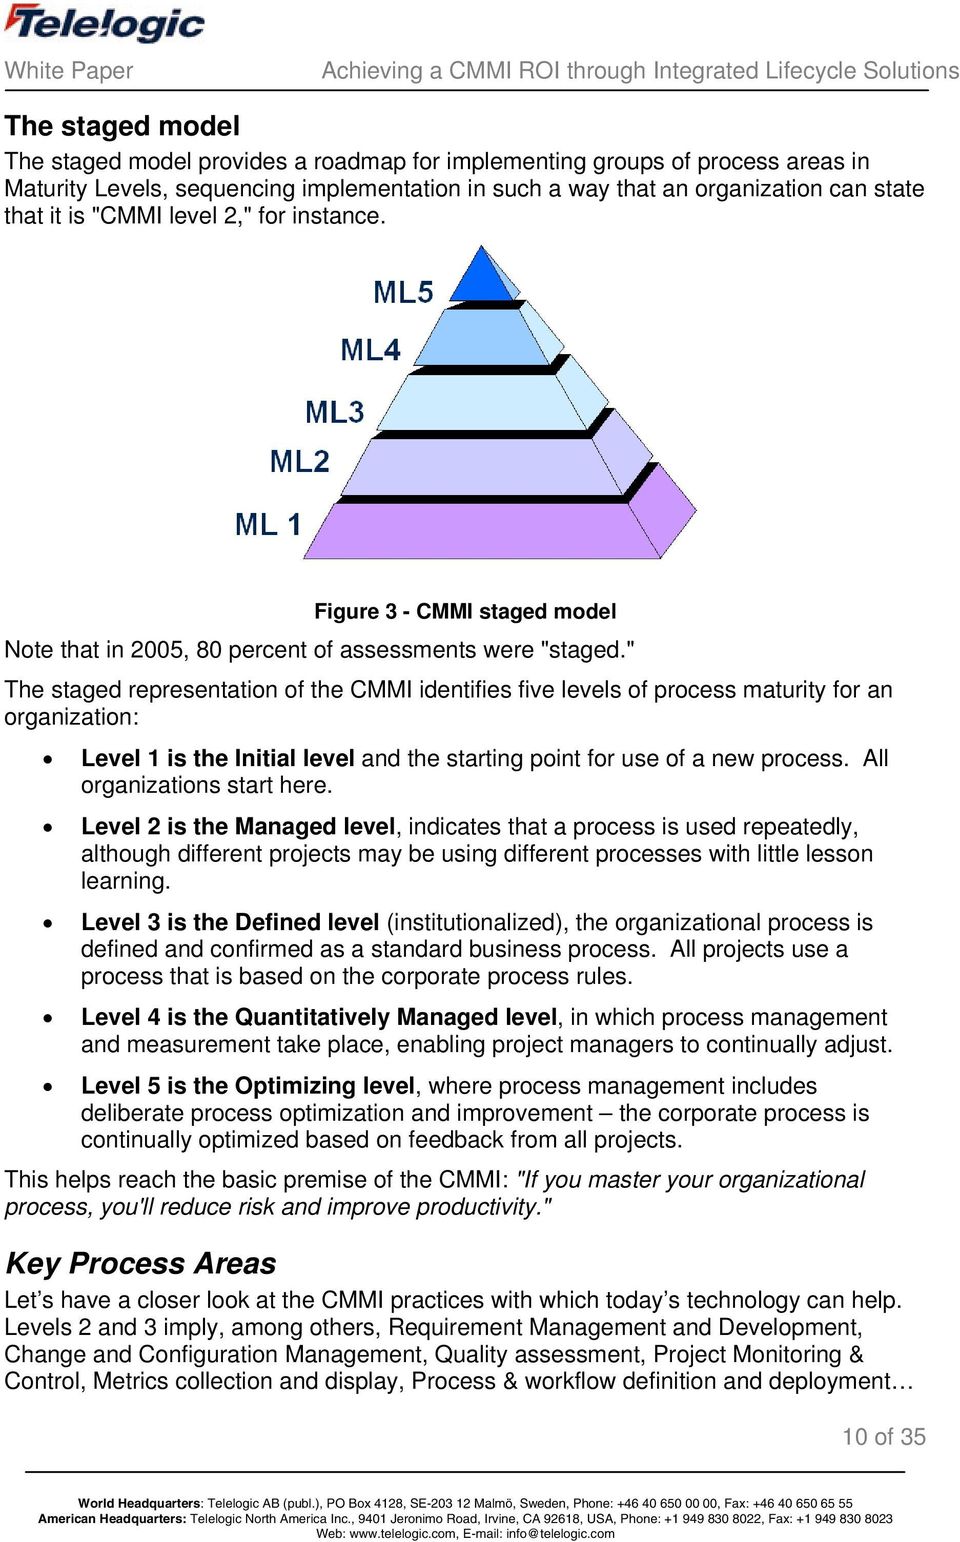 " The staged representation of the CMMI identifies five levels of process maturity for an organization: Level 1 is the Initial level and the starting point for use of a new process.